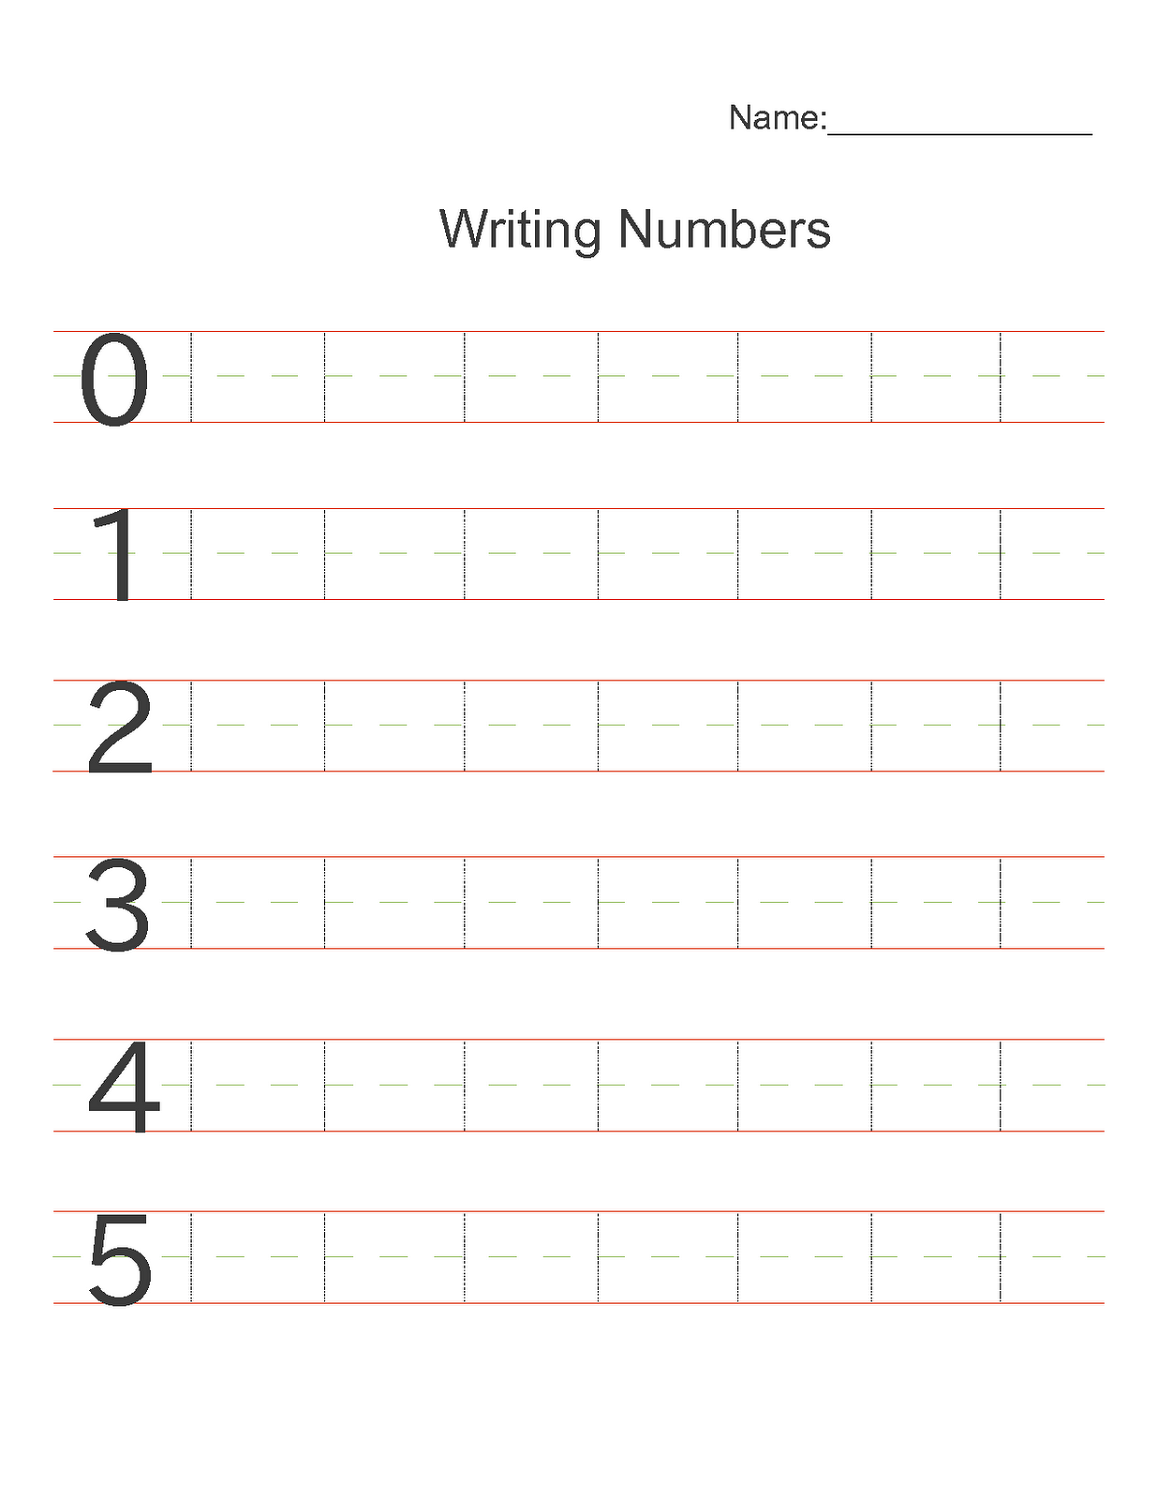 writing-numbers-to-words-worksheets